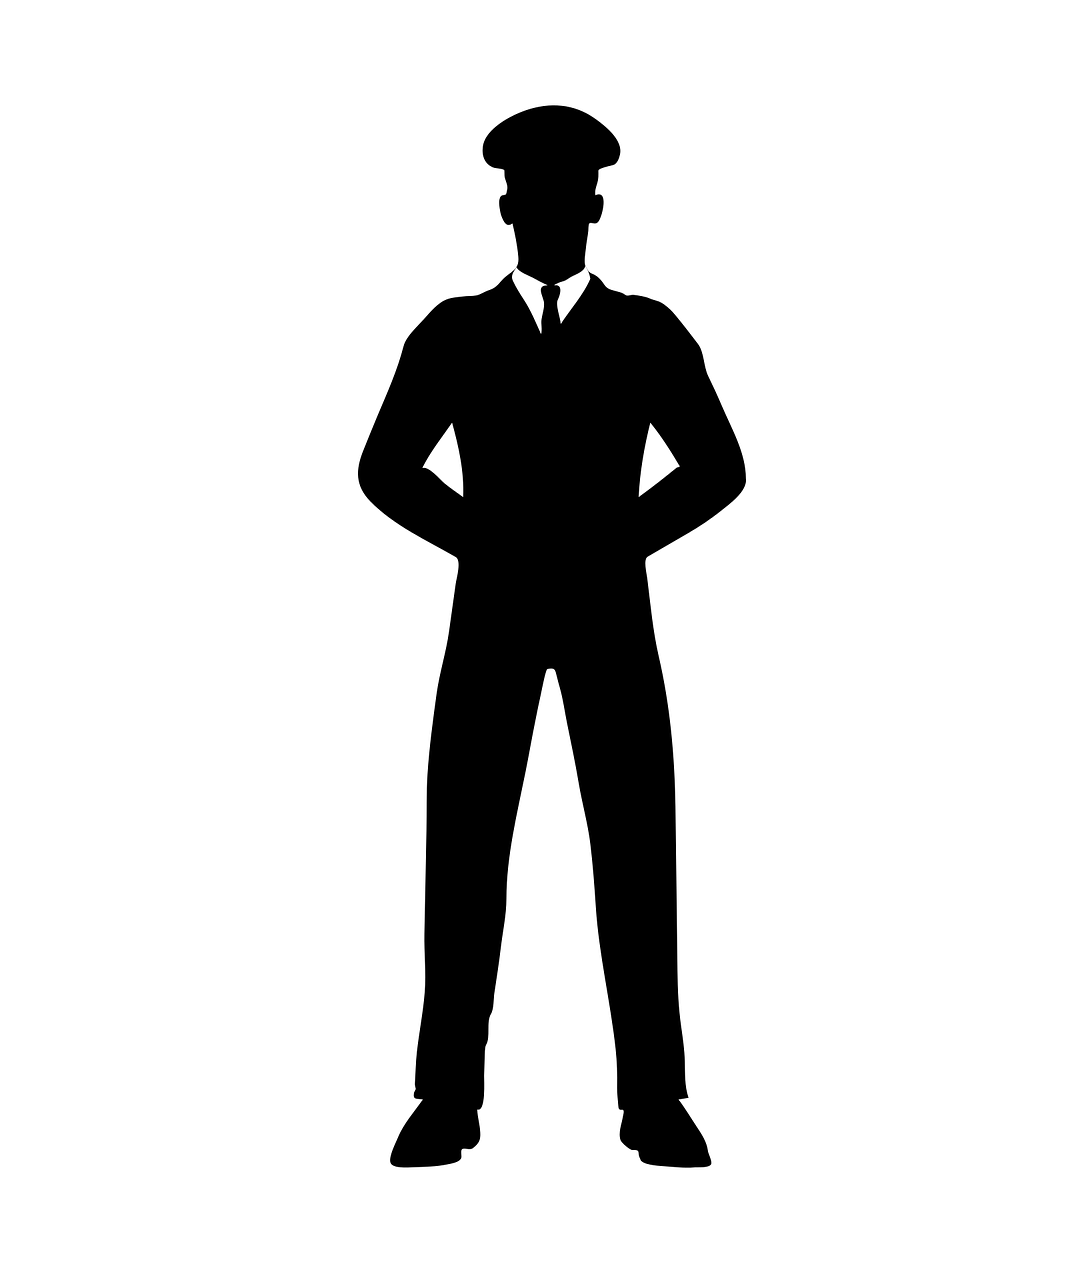 a black and white silhouette of a man in a suit and tie, a stock photo, pixabay, traffic police woman, it is the captain of a crew, full body with costume, no - text no - logo